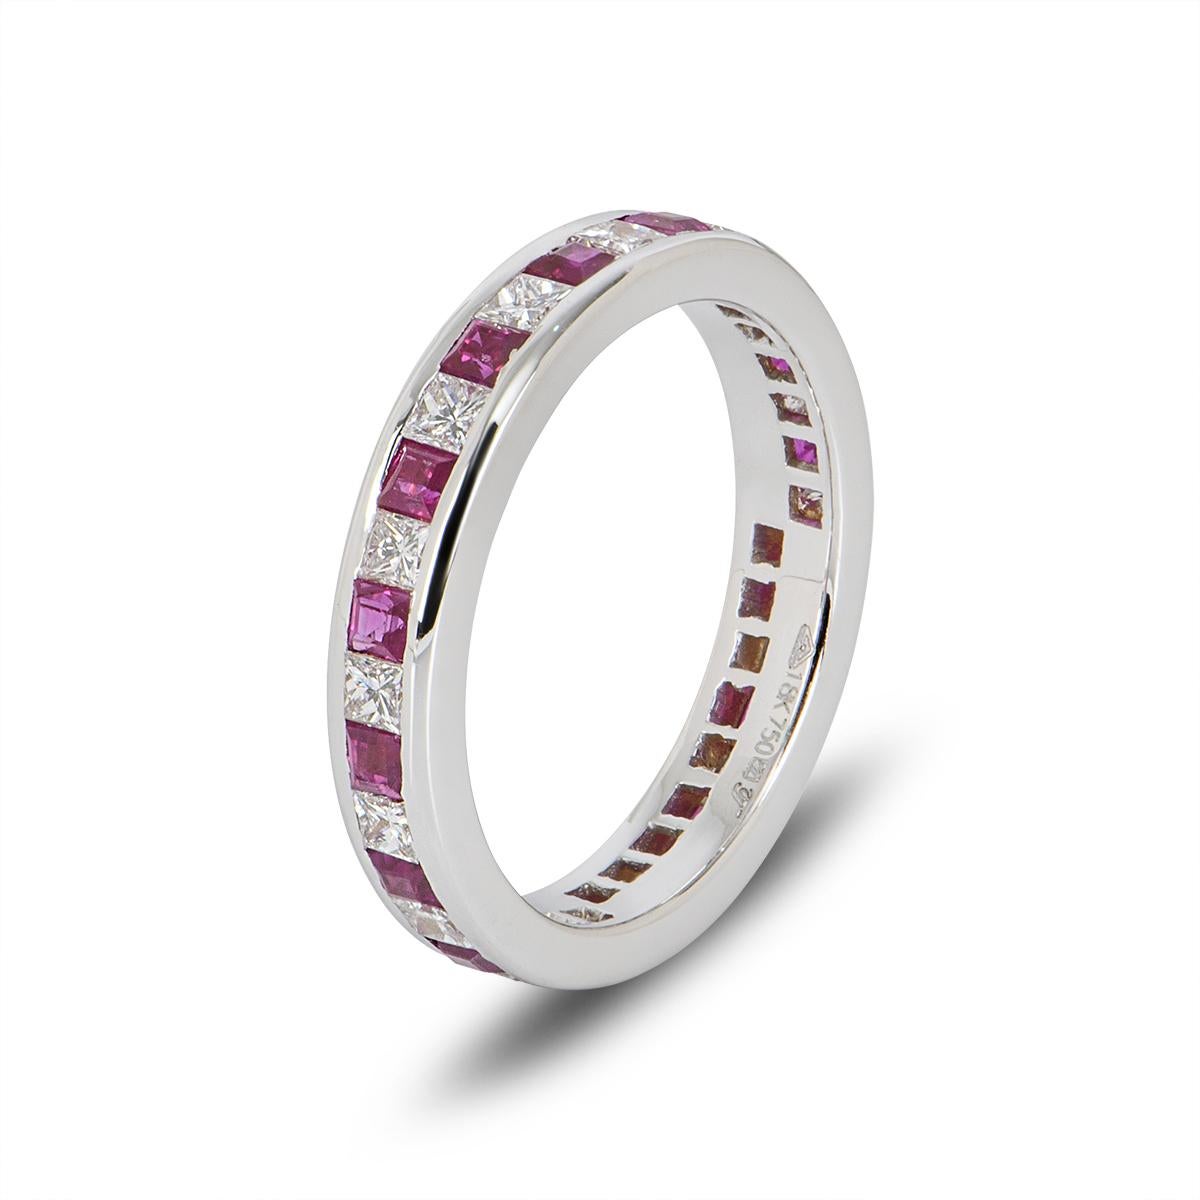 A beautiful 18k white gold ruby and diamond full eternity ring. The ring is channel set with 15 square cut rubies with an approximate weight of 0.92ct and 16 princess cut diamonds with an approximate weight of 0.82ct. The ring measures 3.7mm wide,